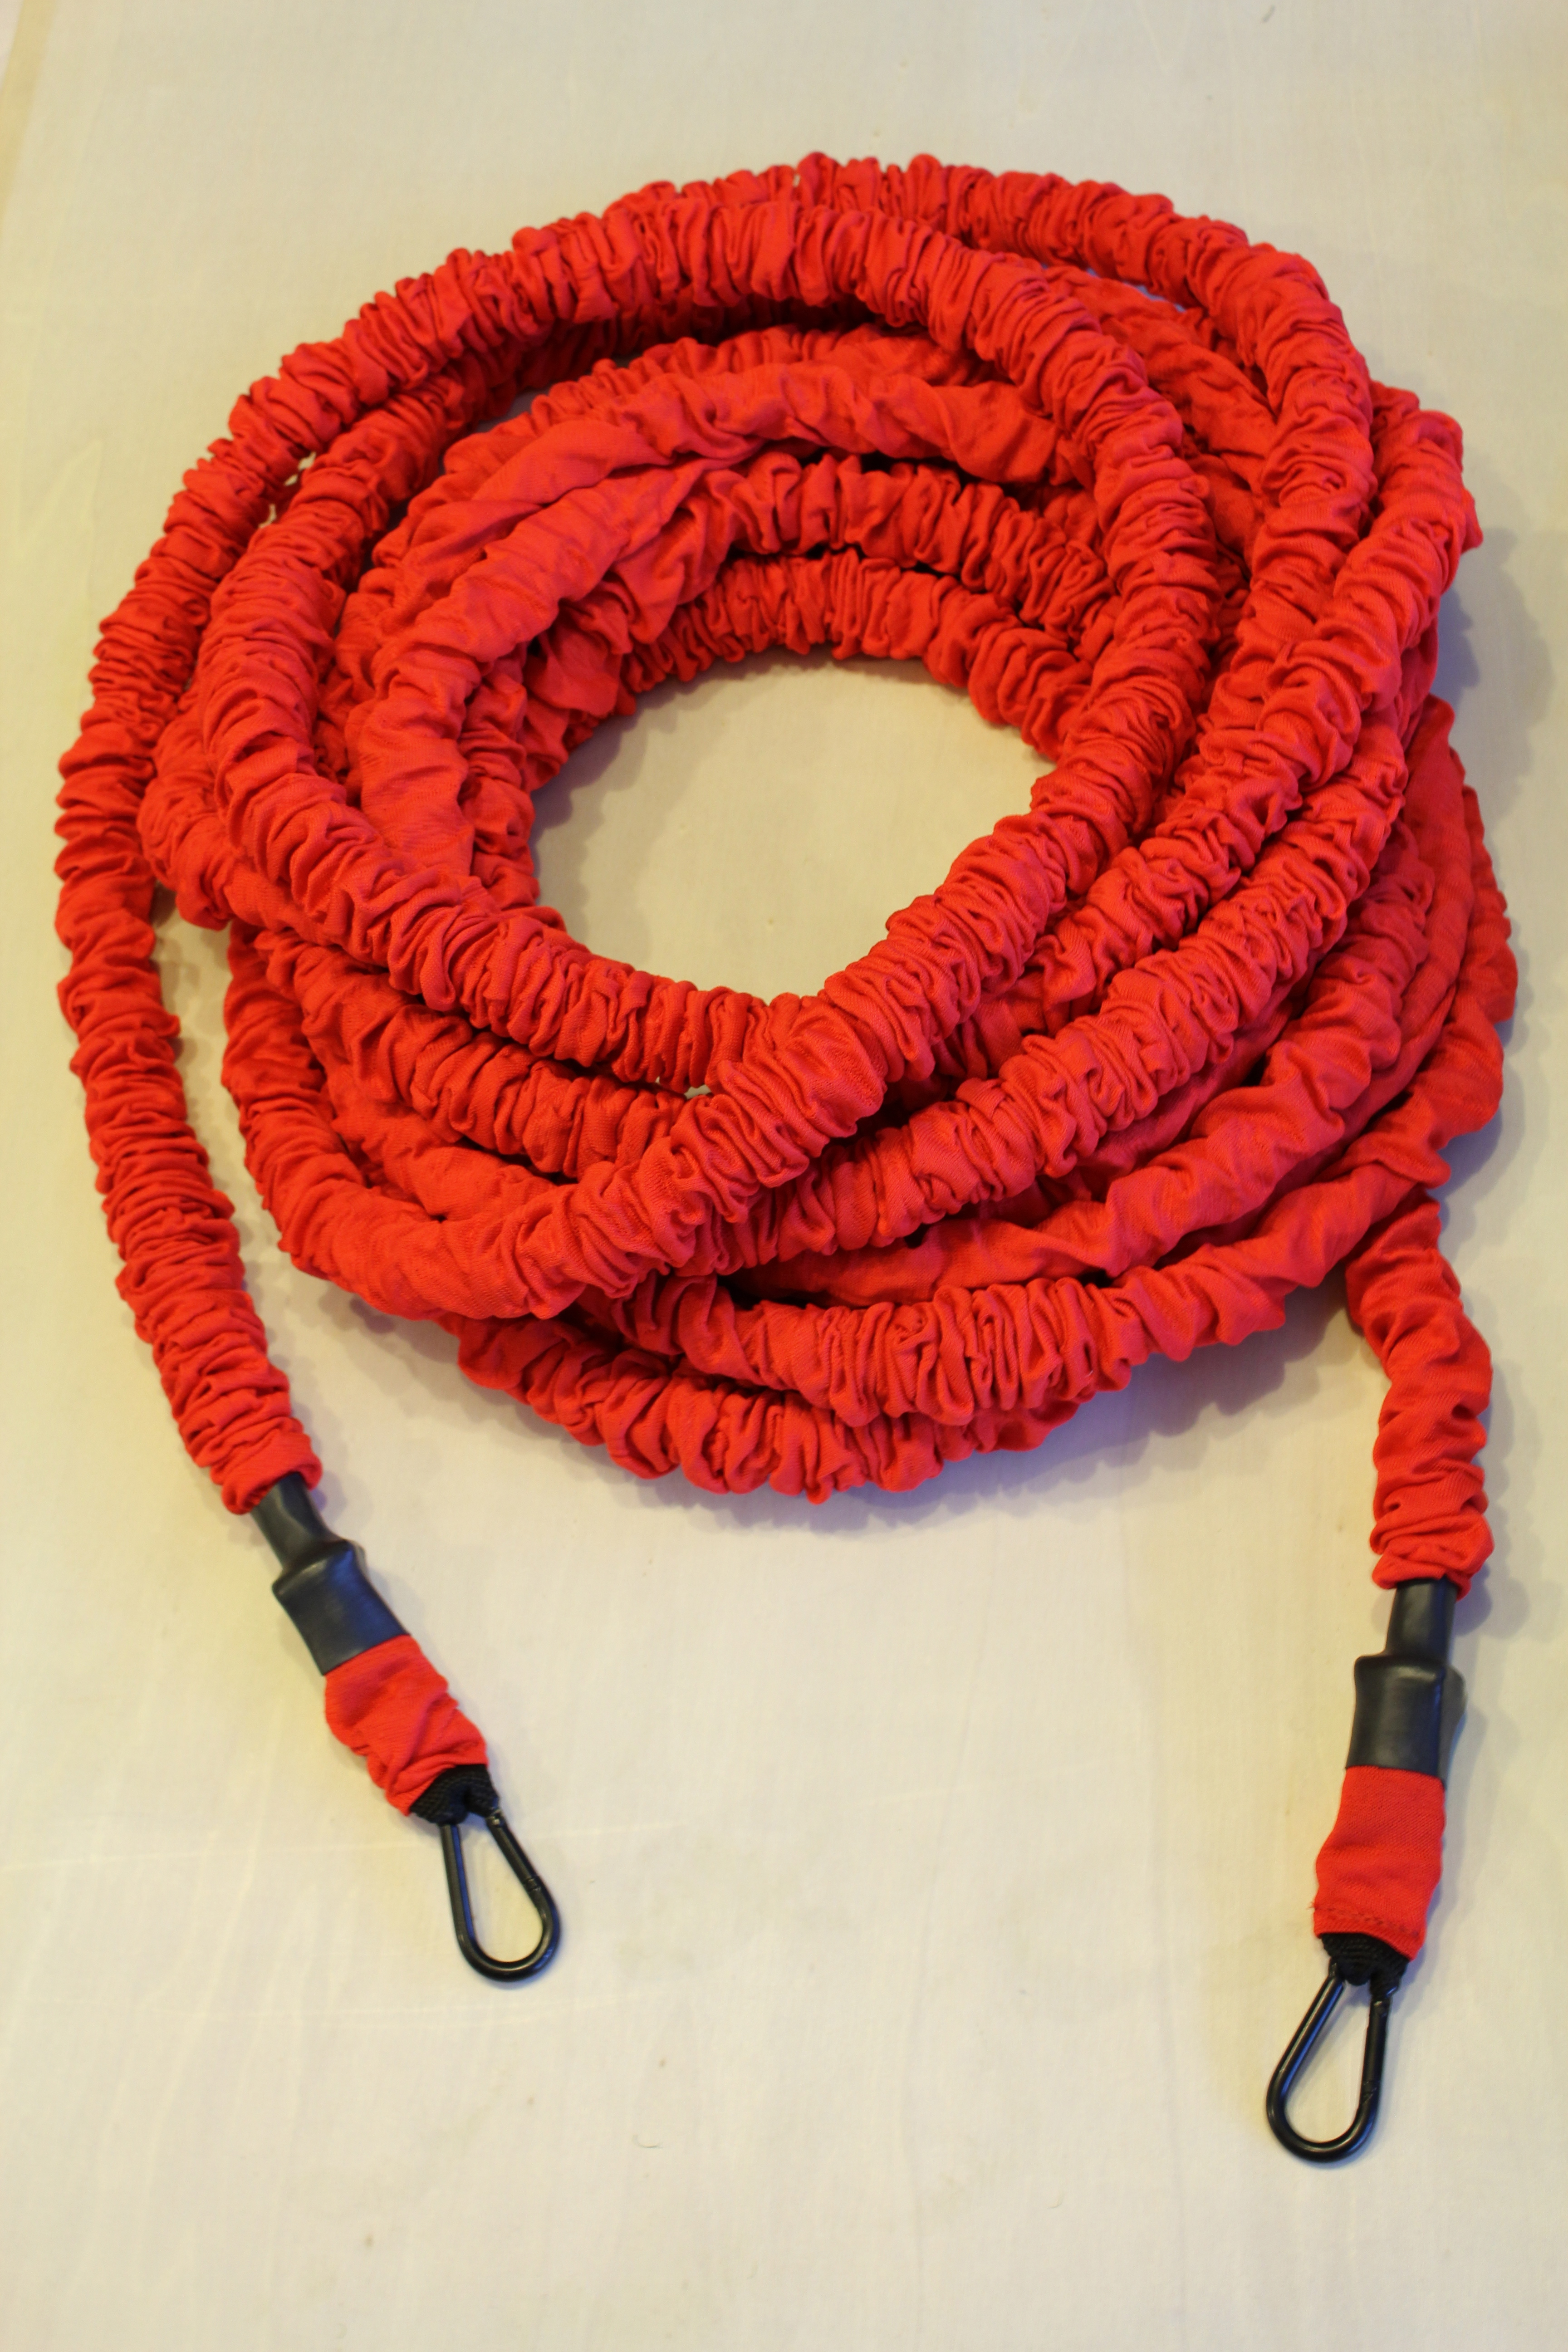 25' Resistance Cord